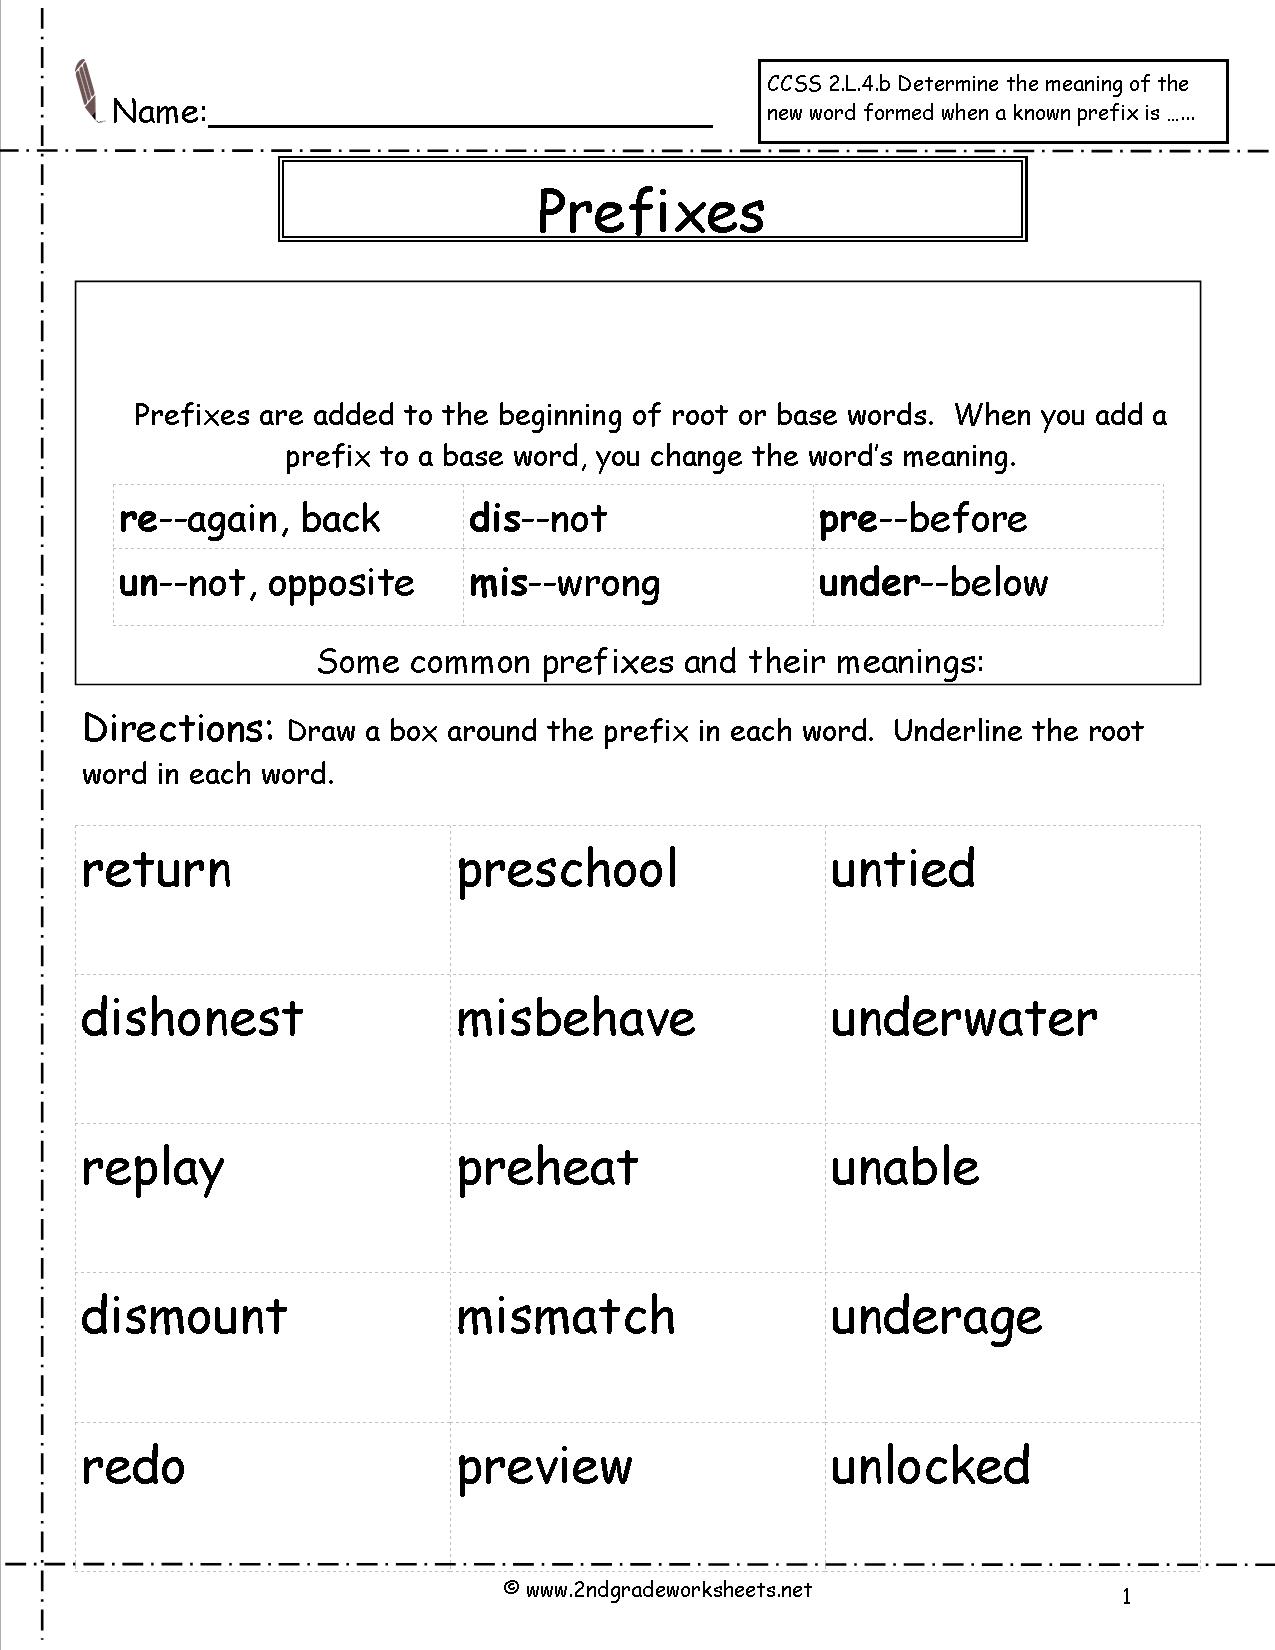 13 Best Images of 1 Year Writing Worksheets - Creative ...